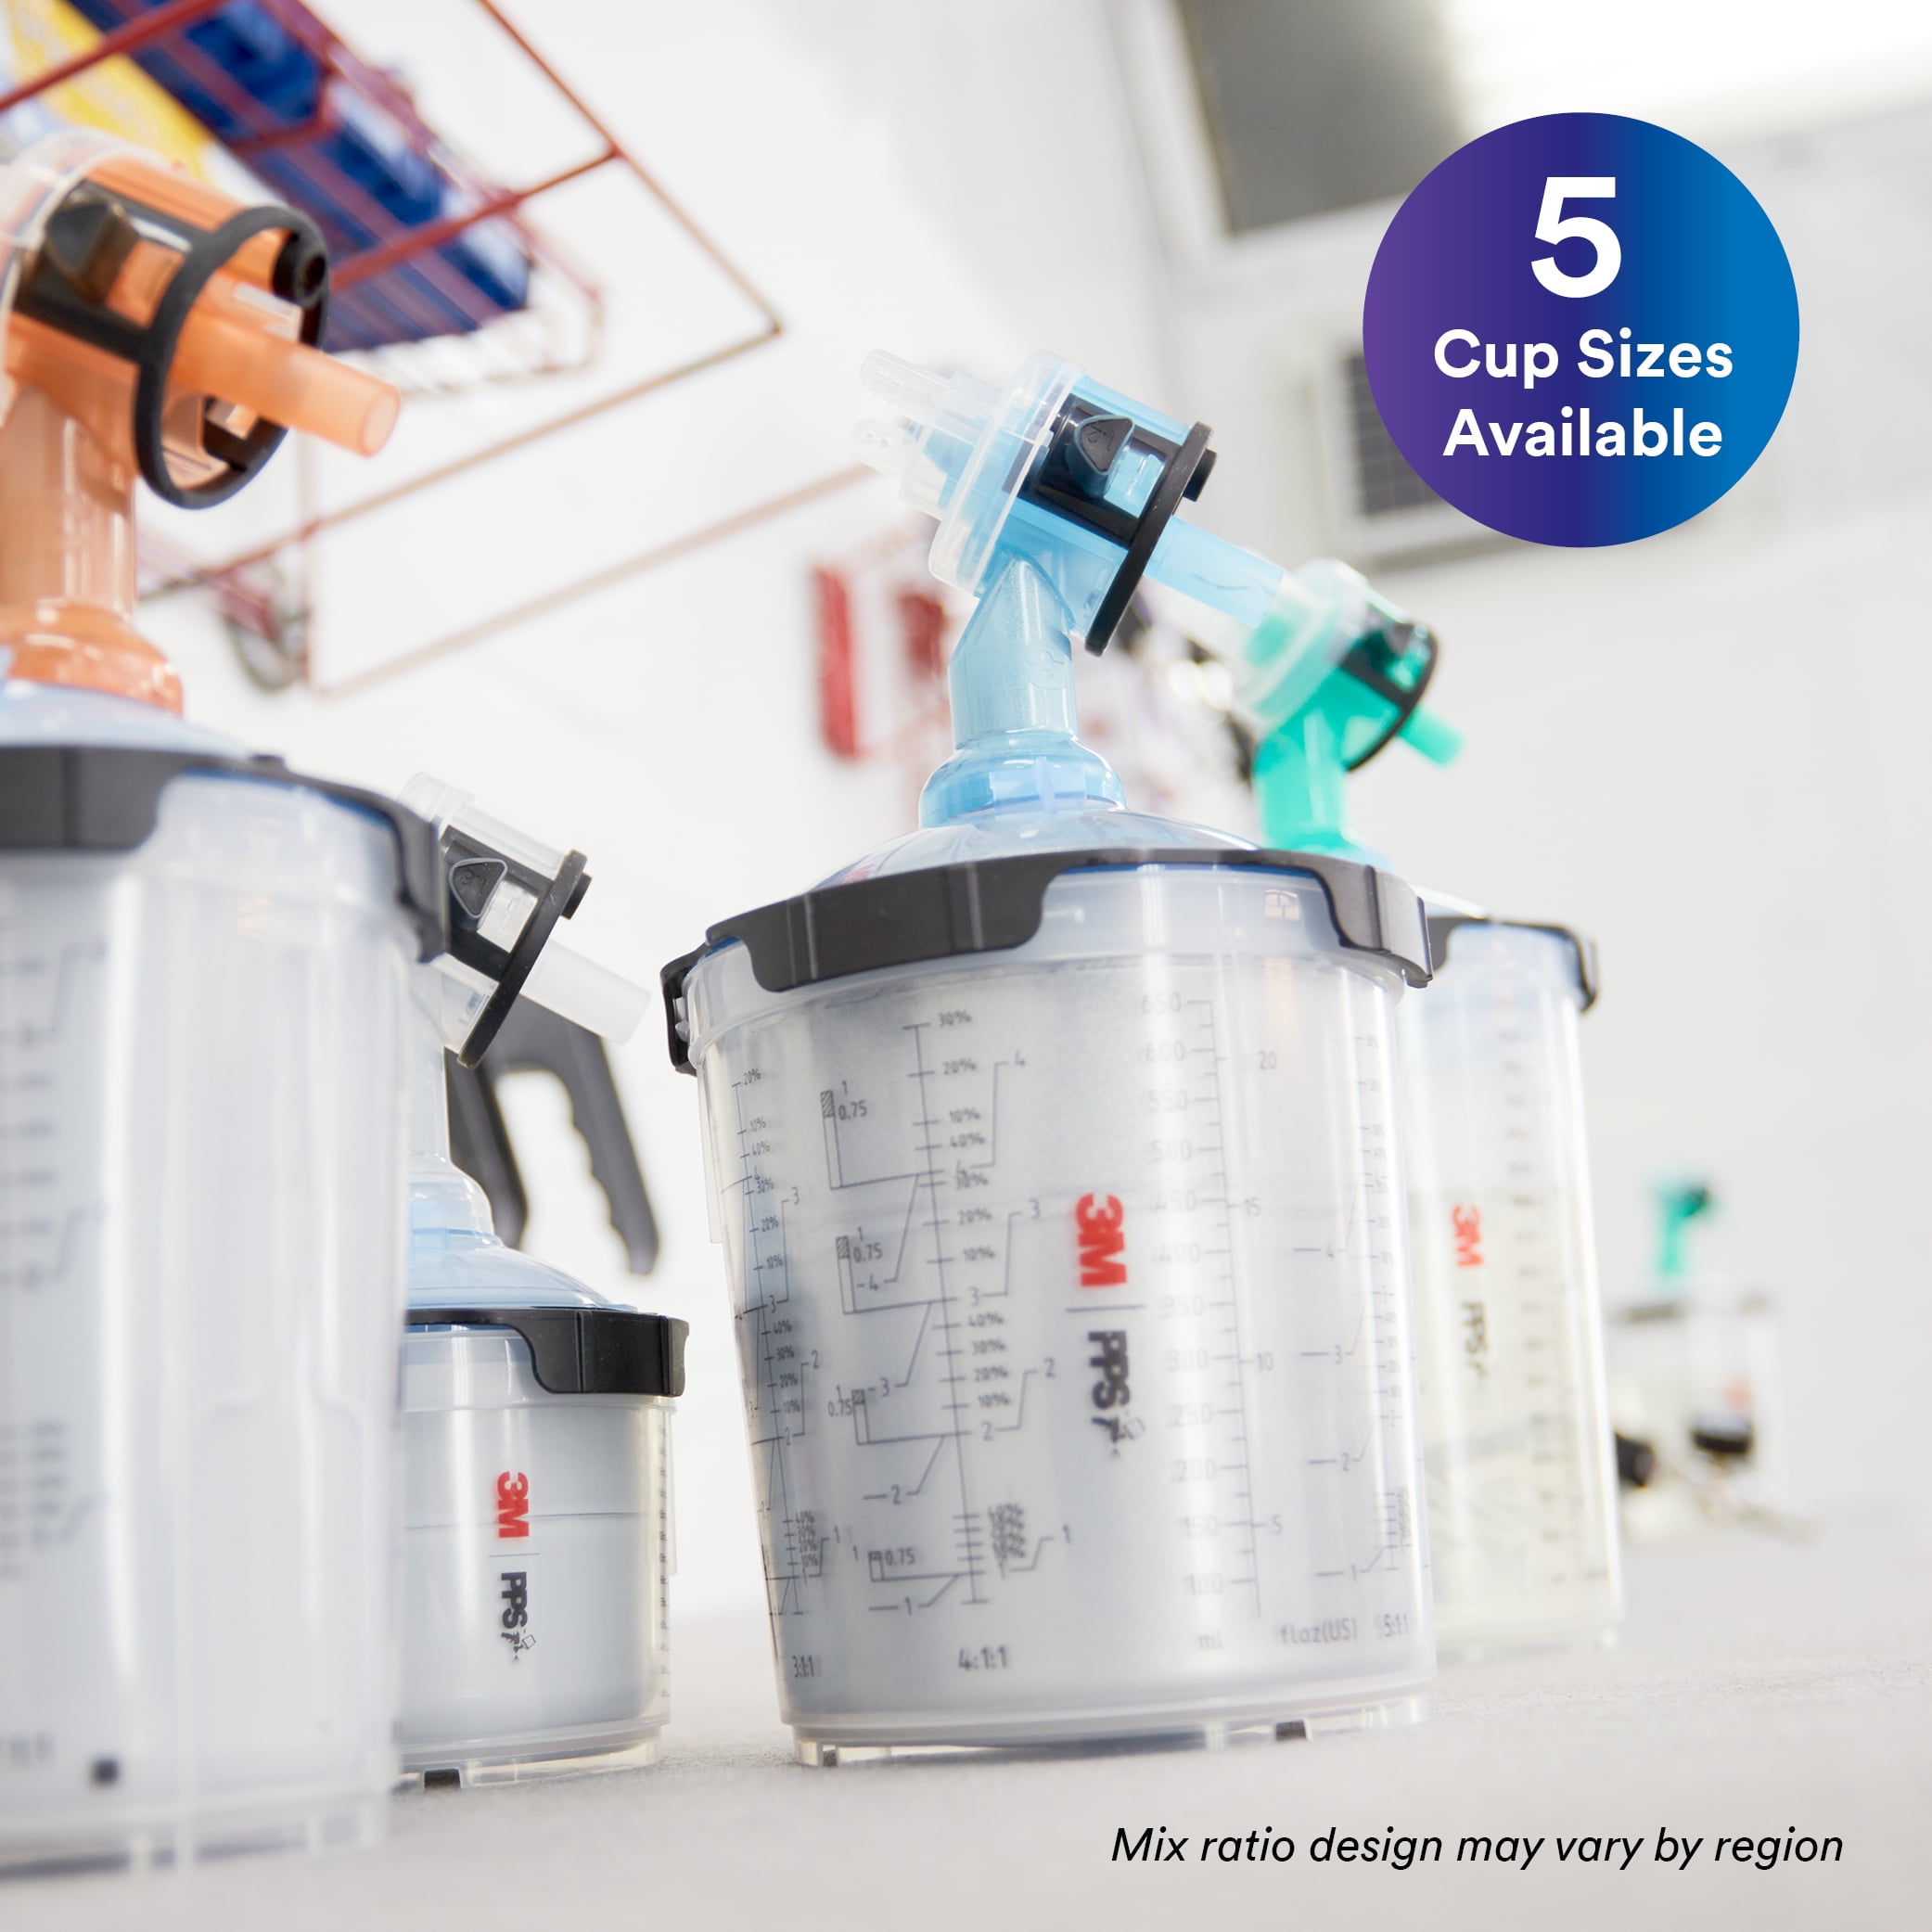 3M® 26000 - PPS™ Series 2.0™ 650 ml Standard Gravity Feed Spray Cup System  Kit with 200 Micron Filter 